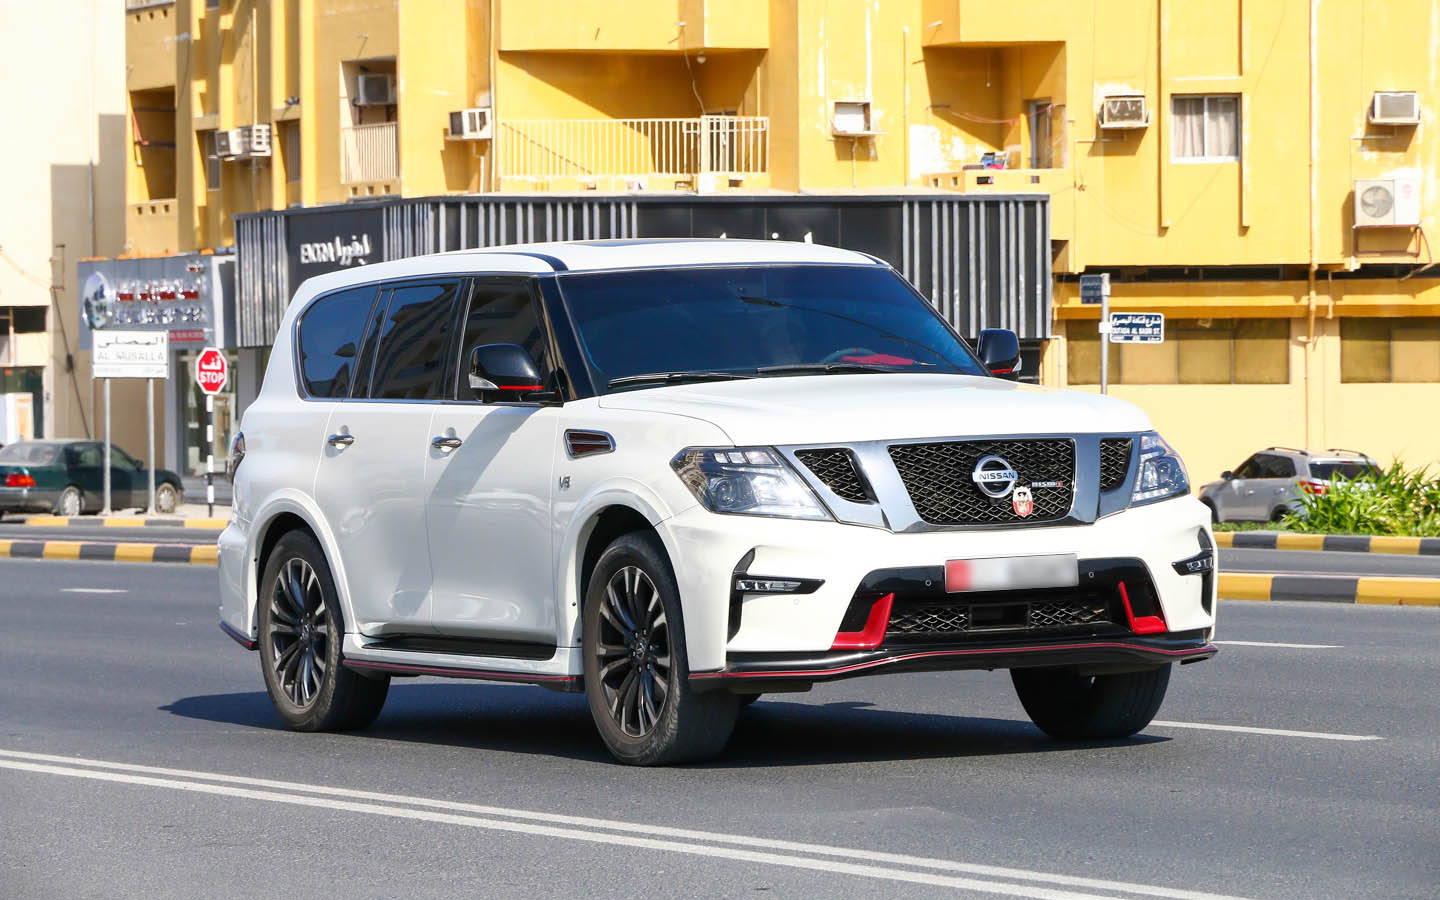 the journey of Nissan Patrol